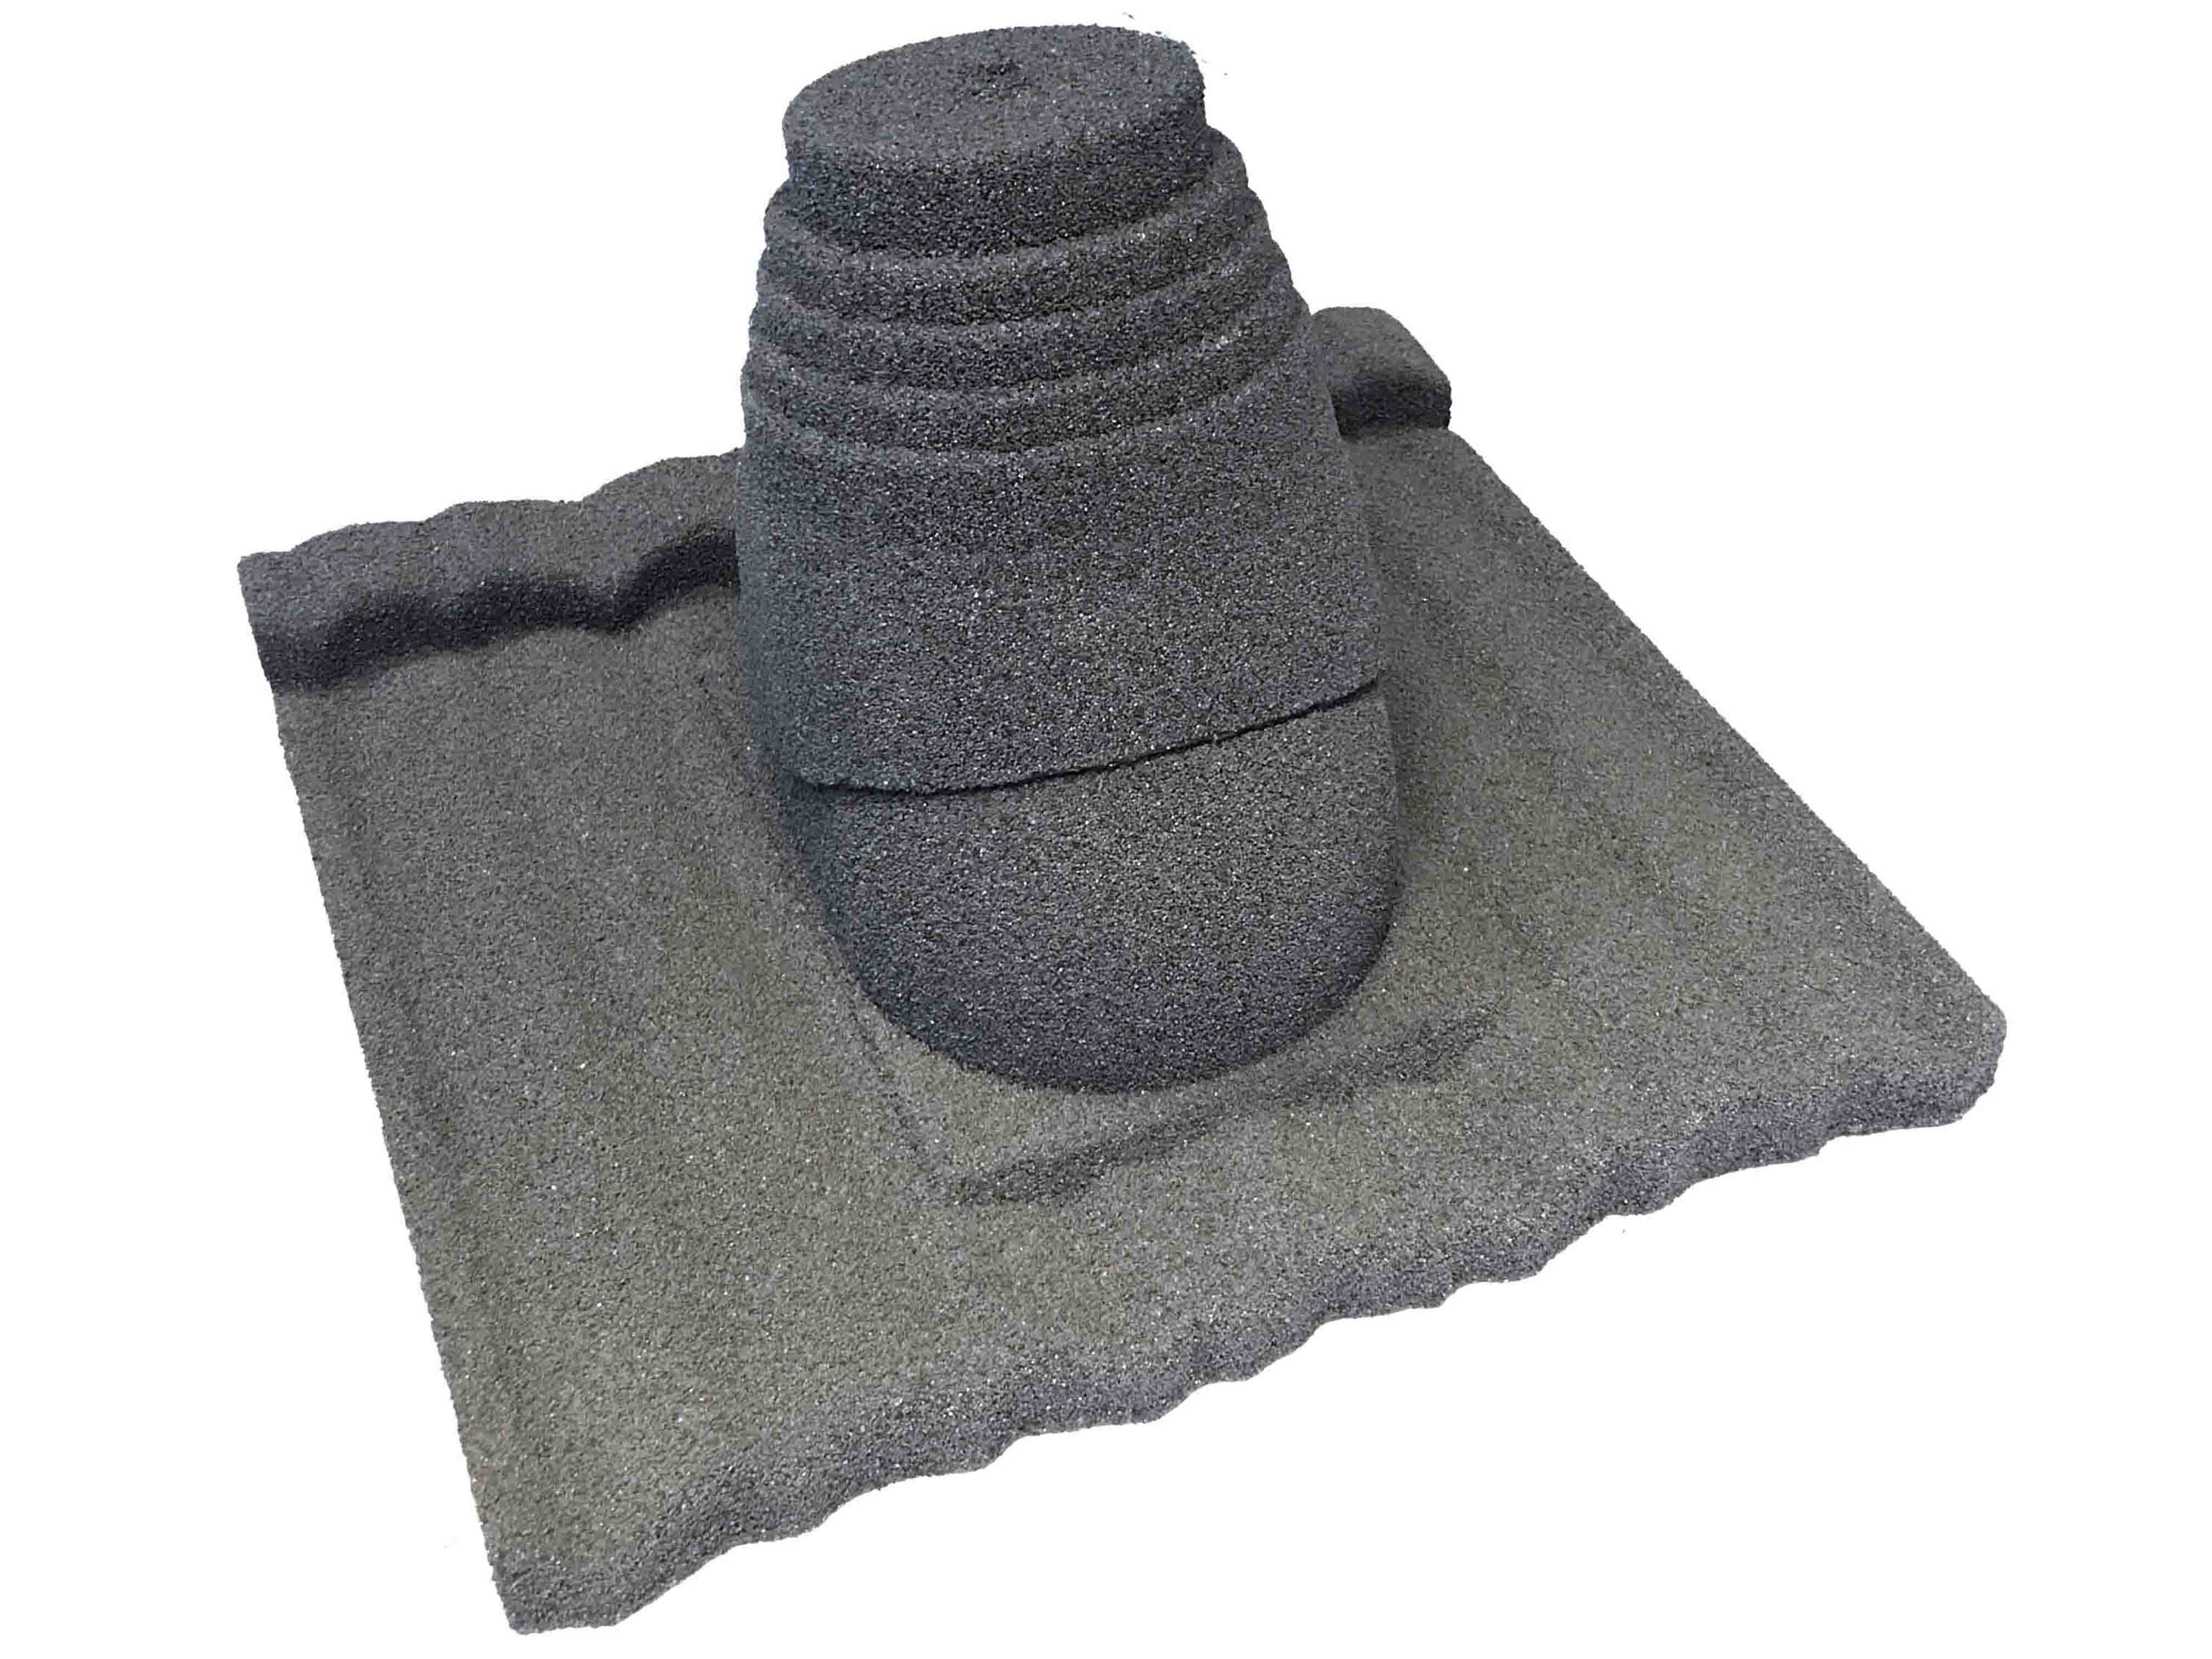 Metrotile Lightweight Roofing Gas Exhaustion Vent Large Charcoal